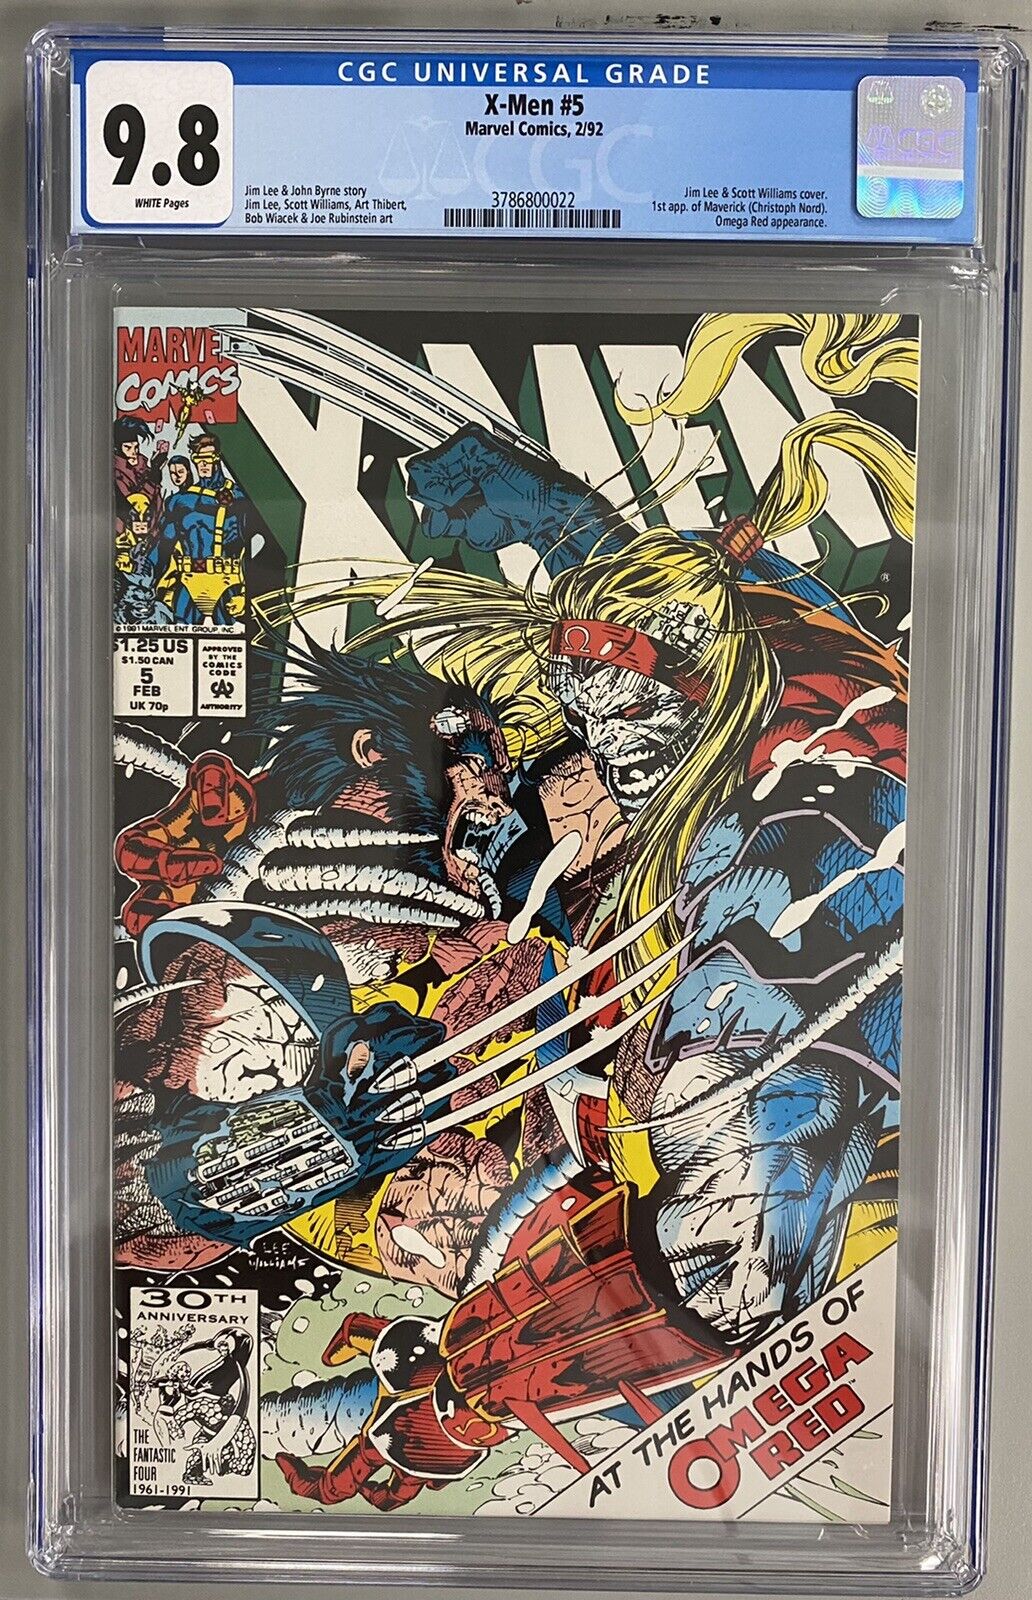 X-MEN #5 CGC 9.8 1st APPEARANCE OF MAVERICK OMEGA RED APPEARANCE & COVER JIM LEE